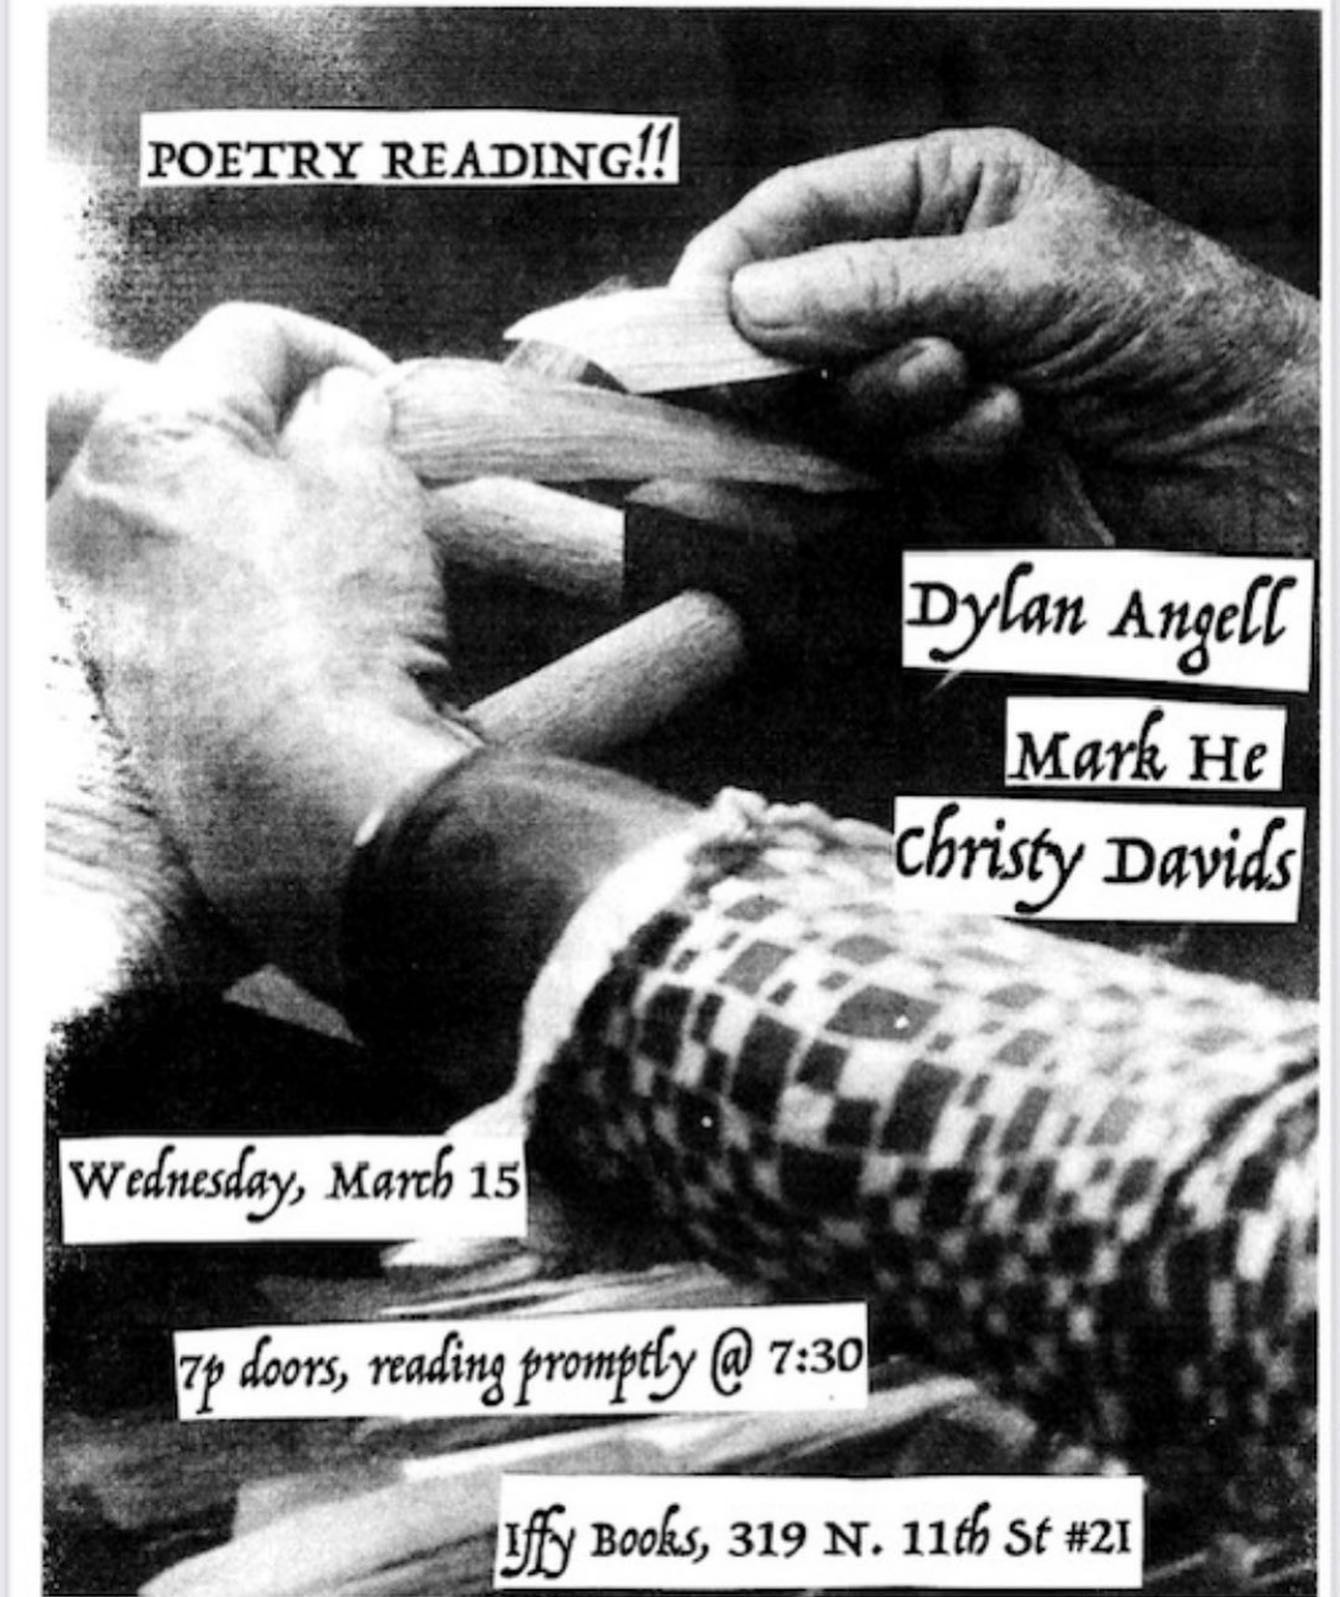 Flyer with a black-and-white photo of someone holding piece of corn husk(?) in their hands, with the following text: Poetry Reading!! / Dylan Angell / Mark He / Christy Davids / Wednesday, March 15 / 7p doors, reading promptly @ 7:30 / Iffy Books, 319 N. 115h St. #2I